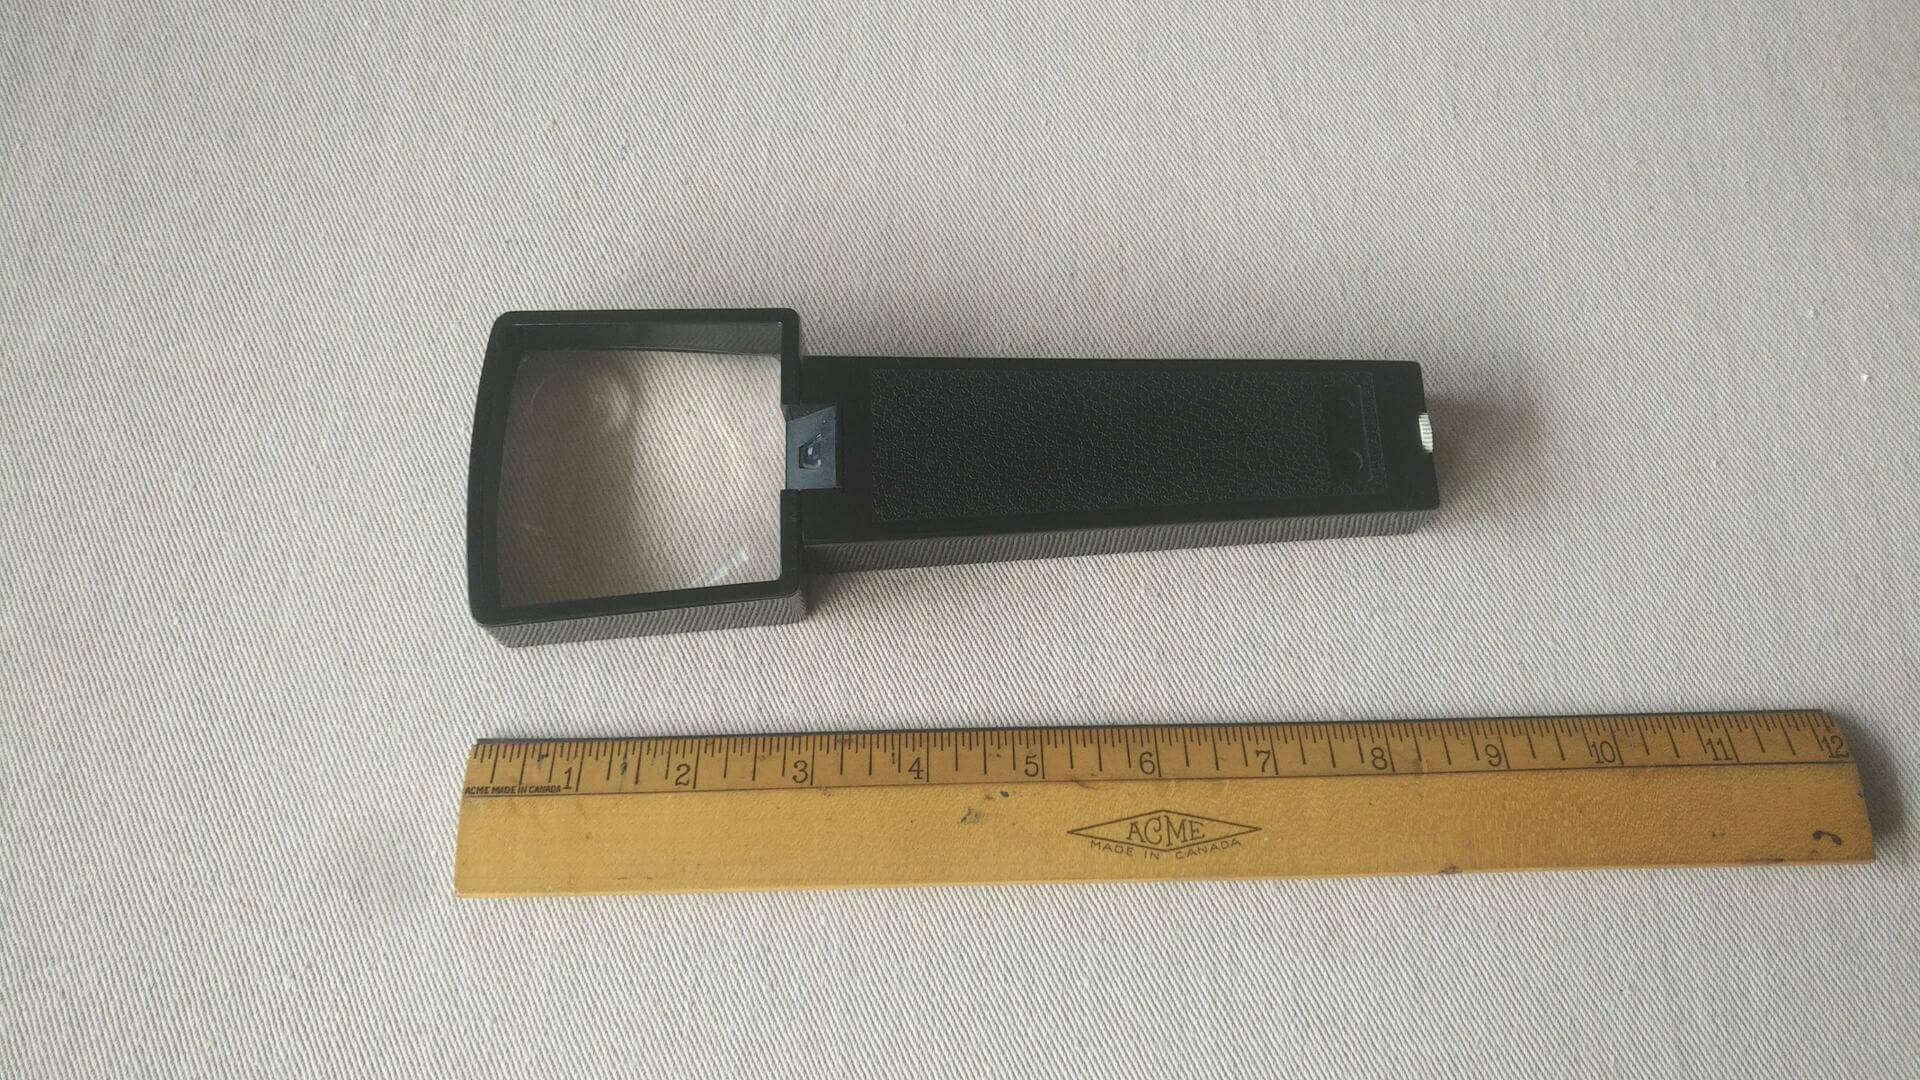 Lumagny illuminated handheld magnifier with dual lens battery operated. Vintage made in Hong Kong collectible magnifying glass and optical tools